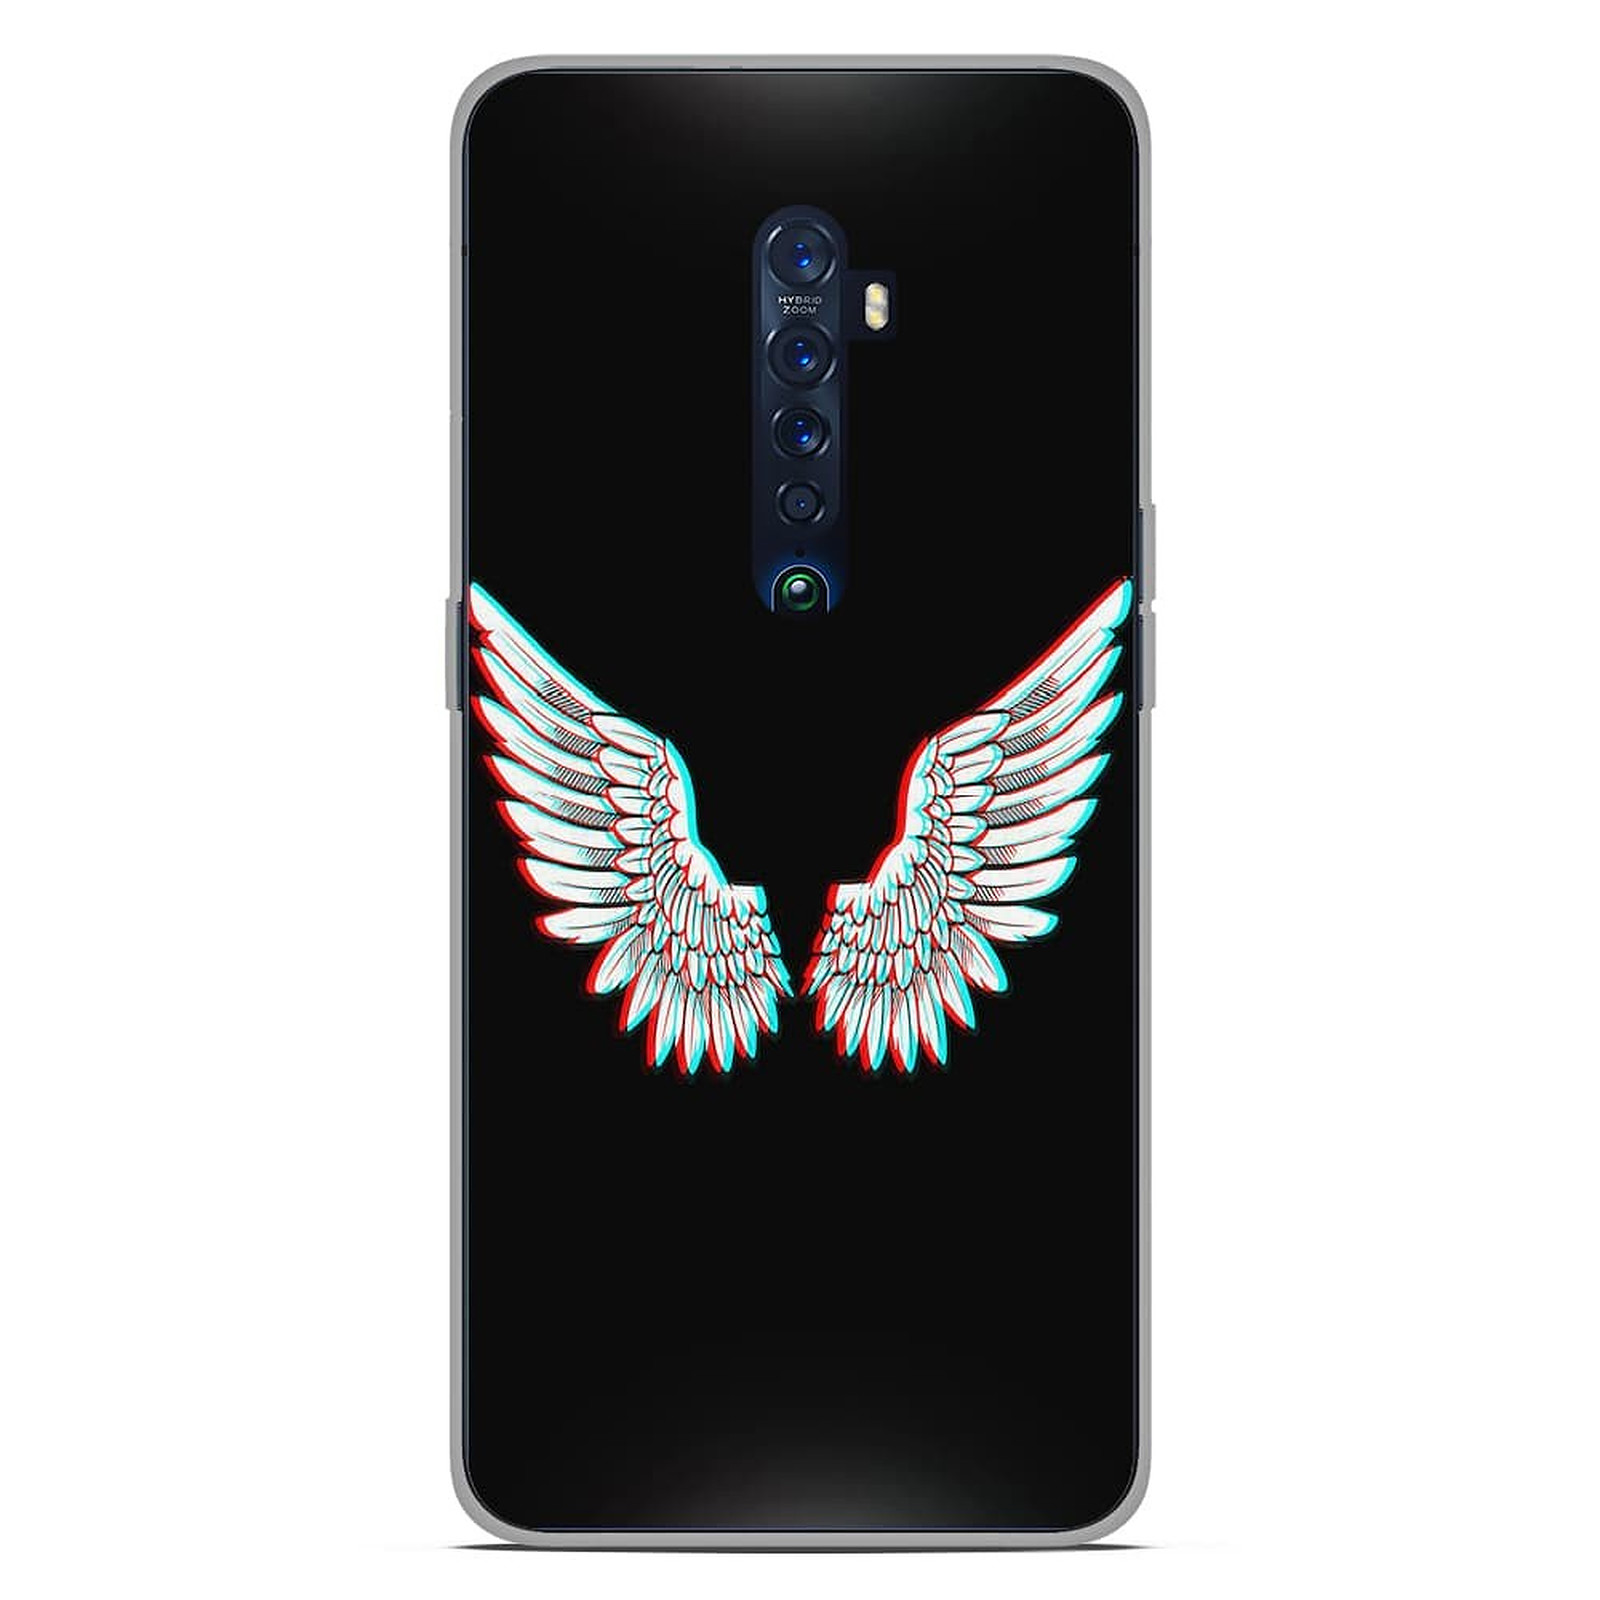 1001 Coques Coque silicone gel Oppo Reno 2 motif Ailes d'Ange - Coque telephone 1001Coques